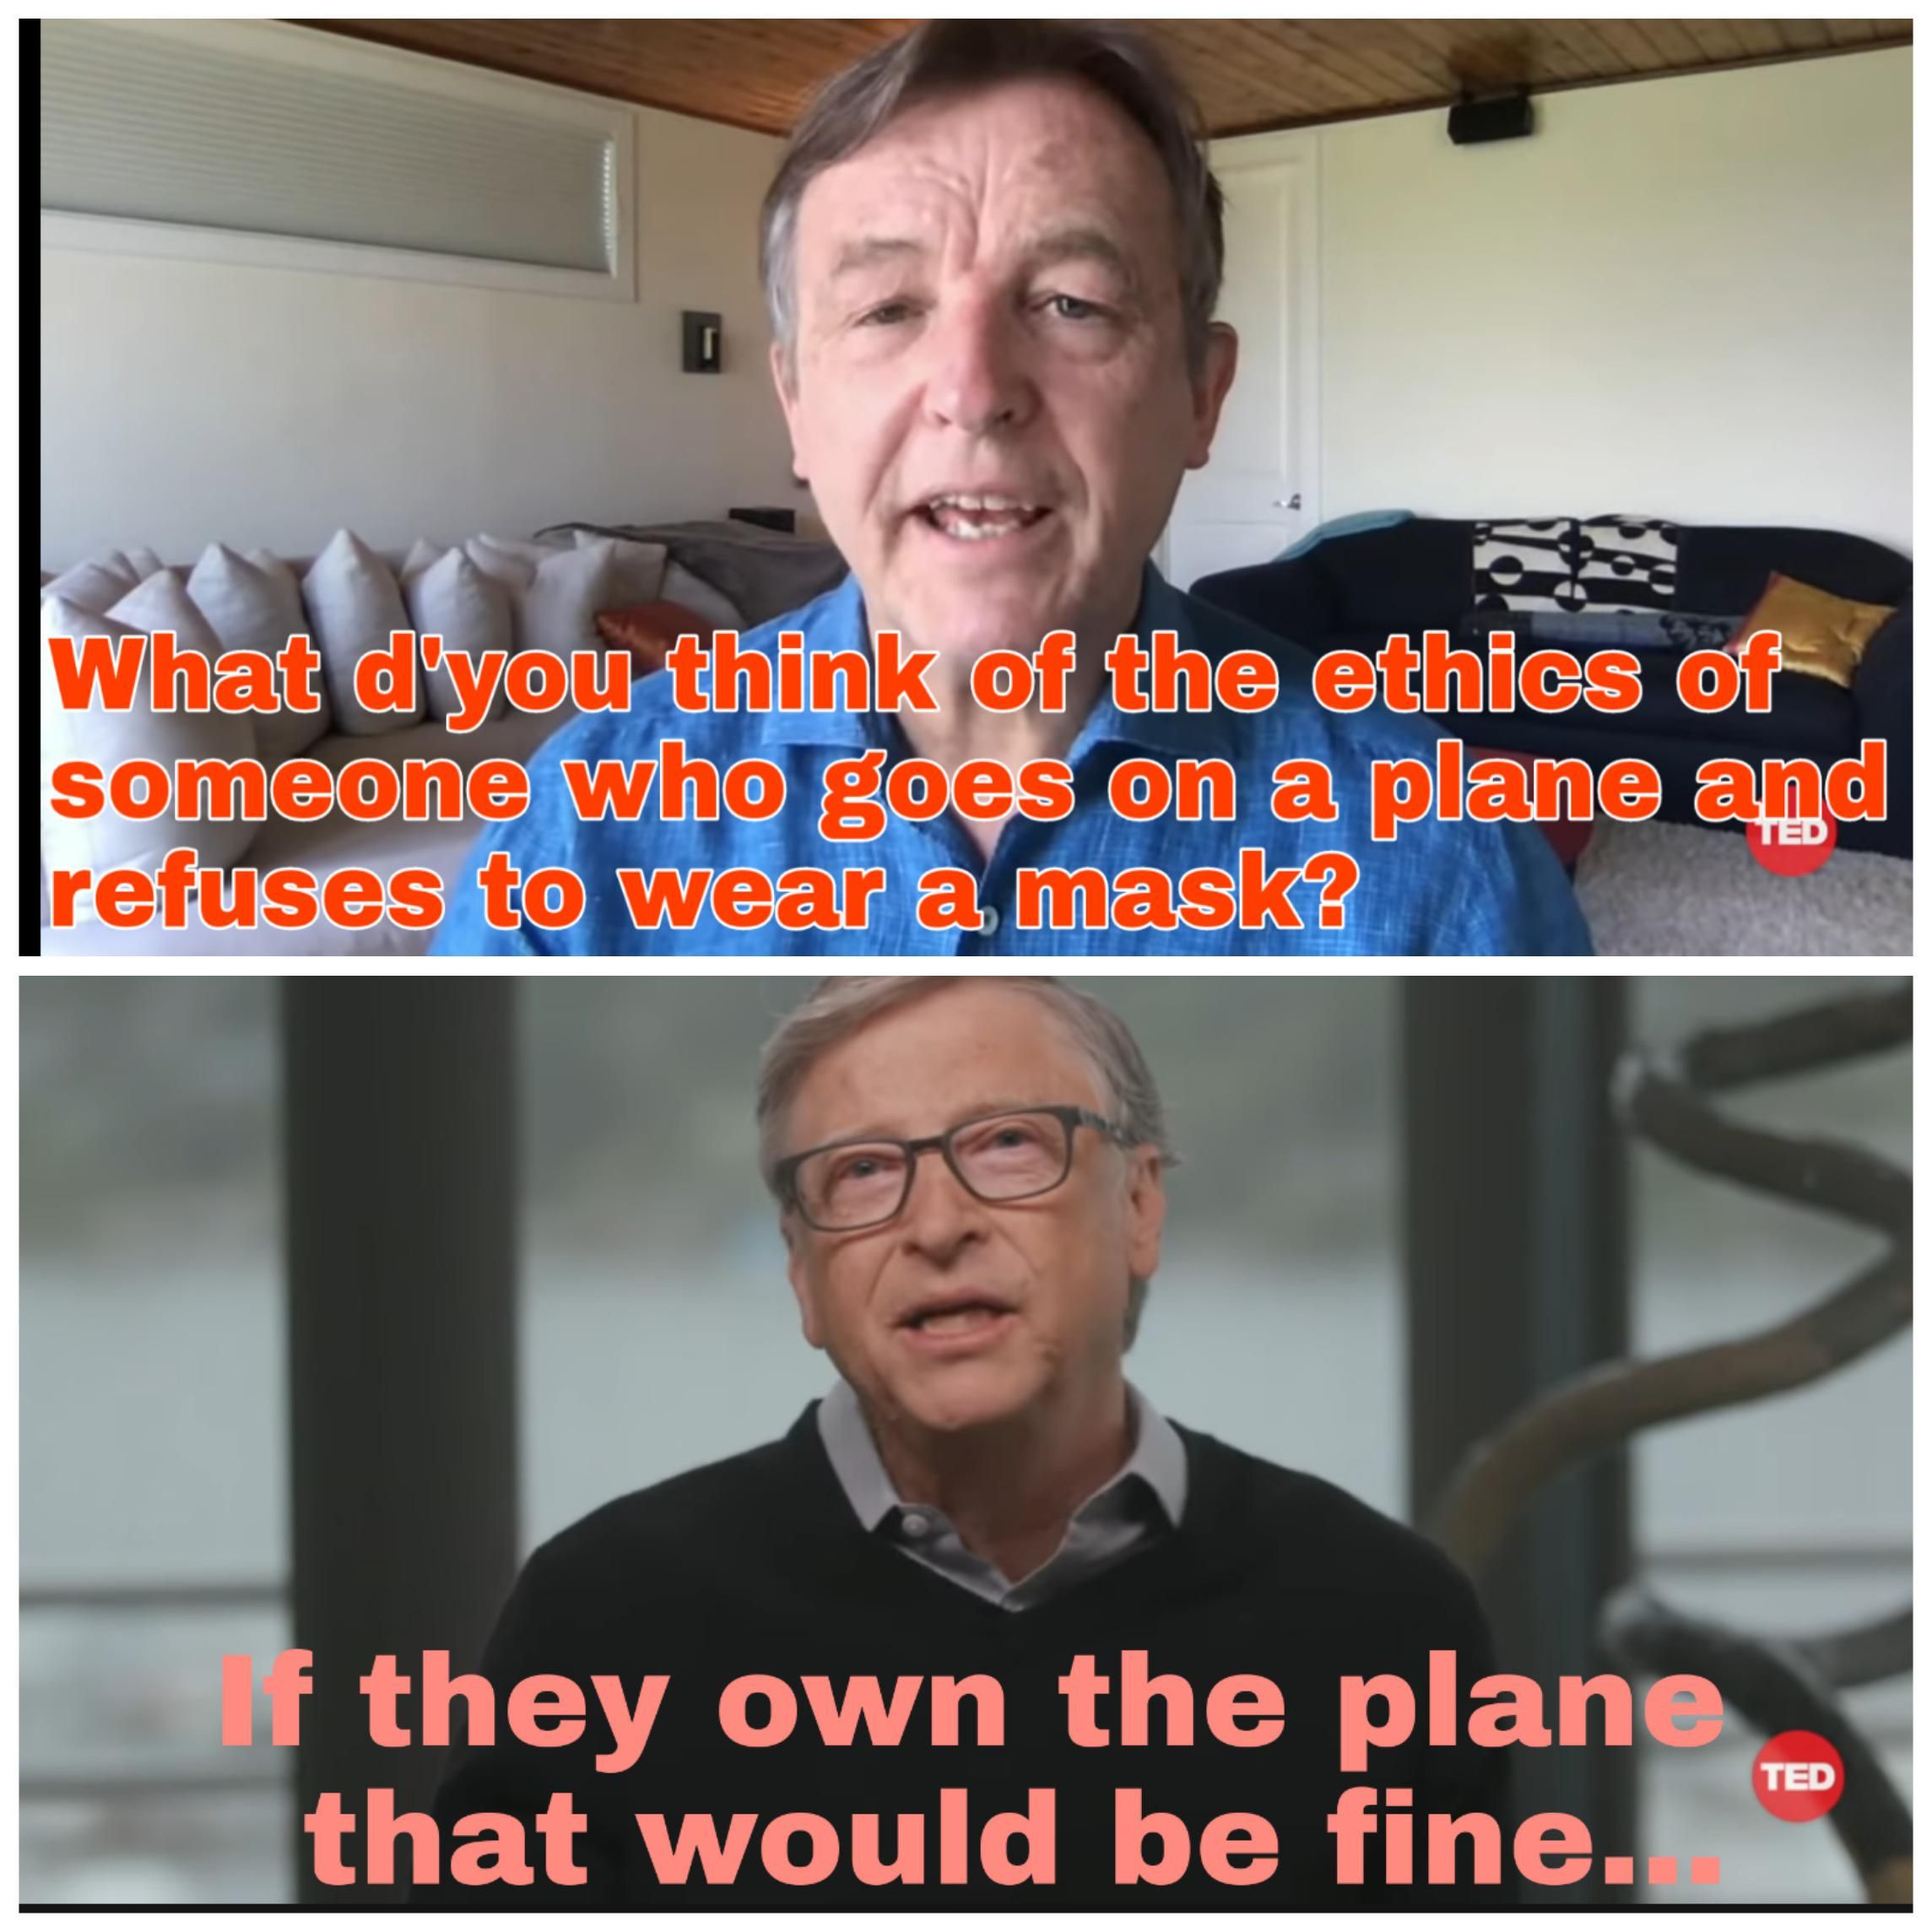 The Bill Gates frame-of-reference